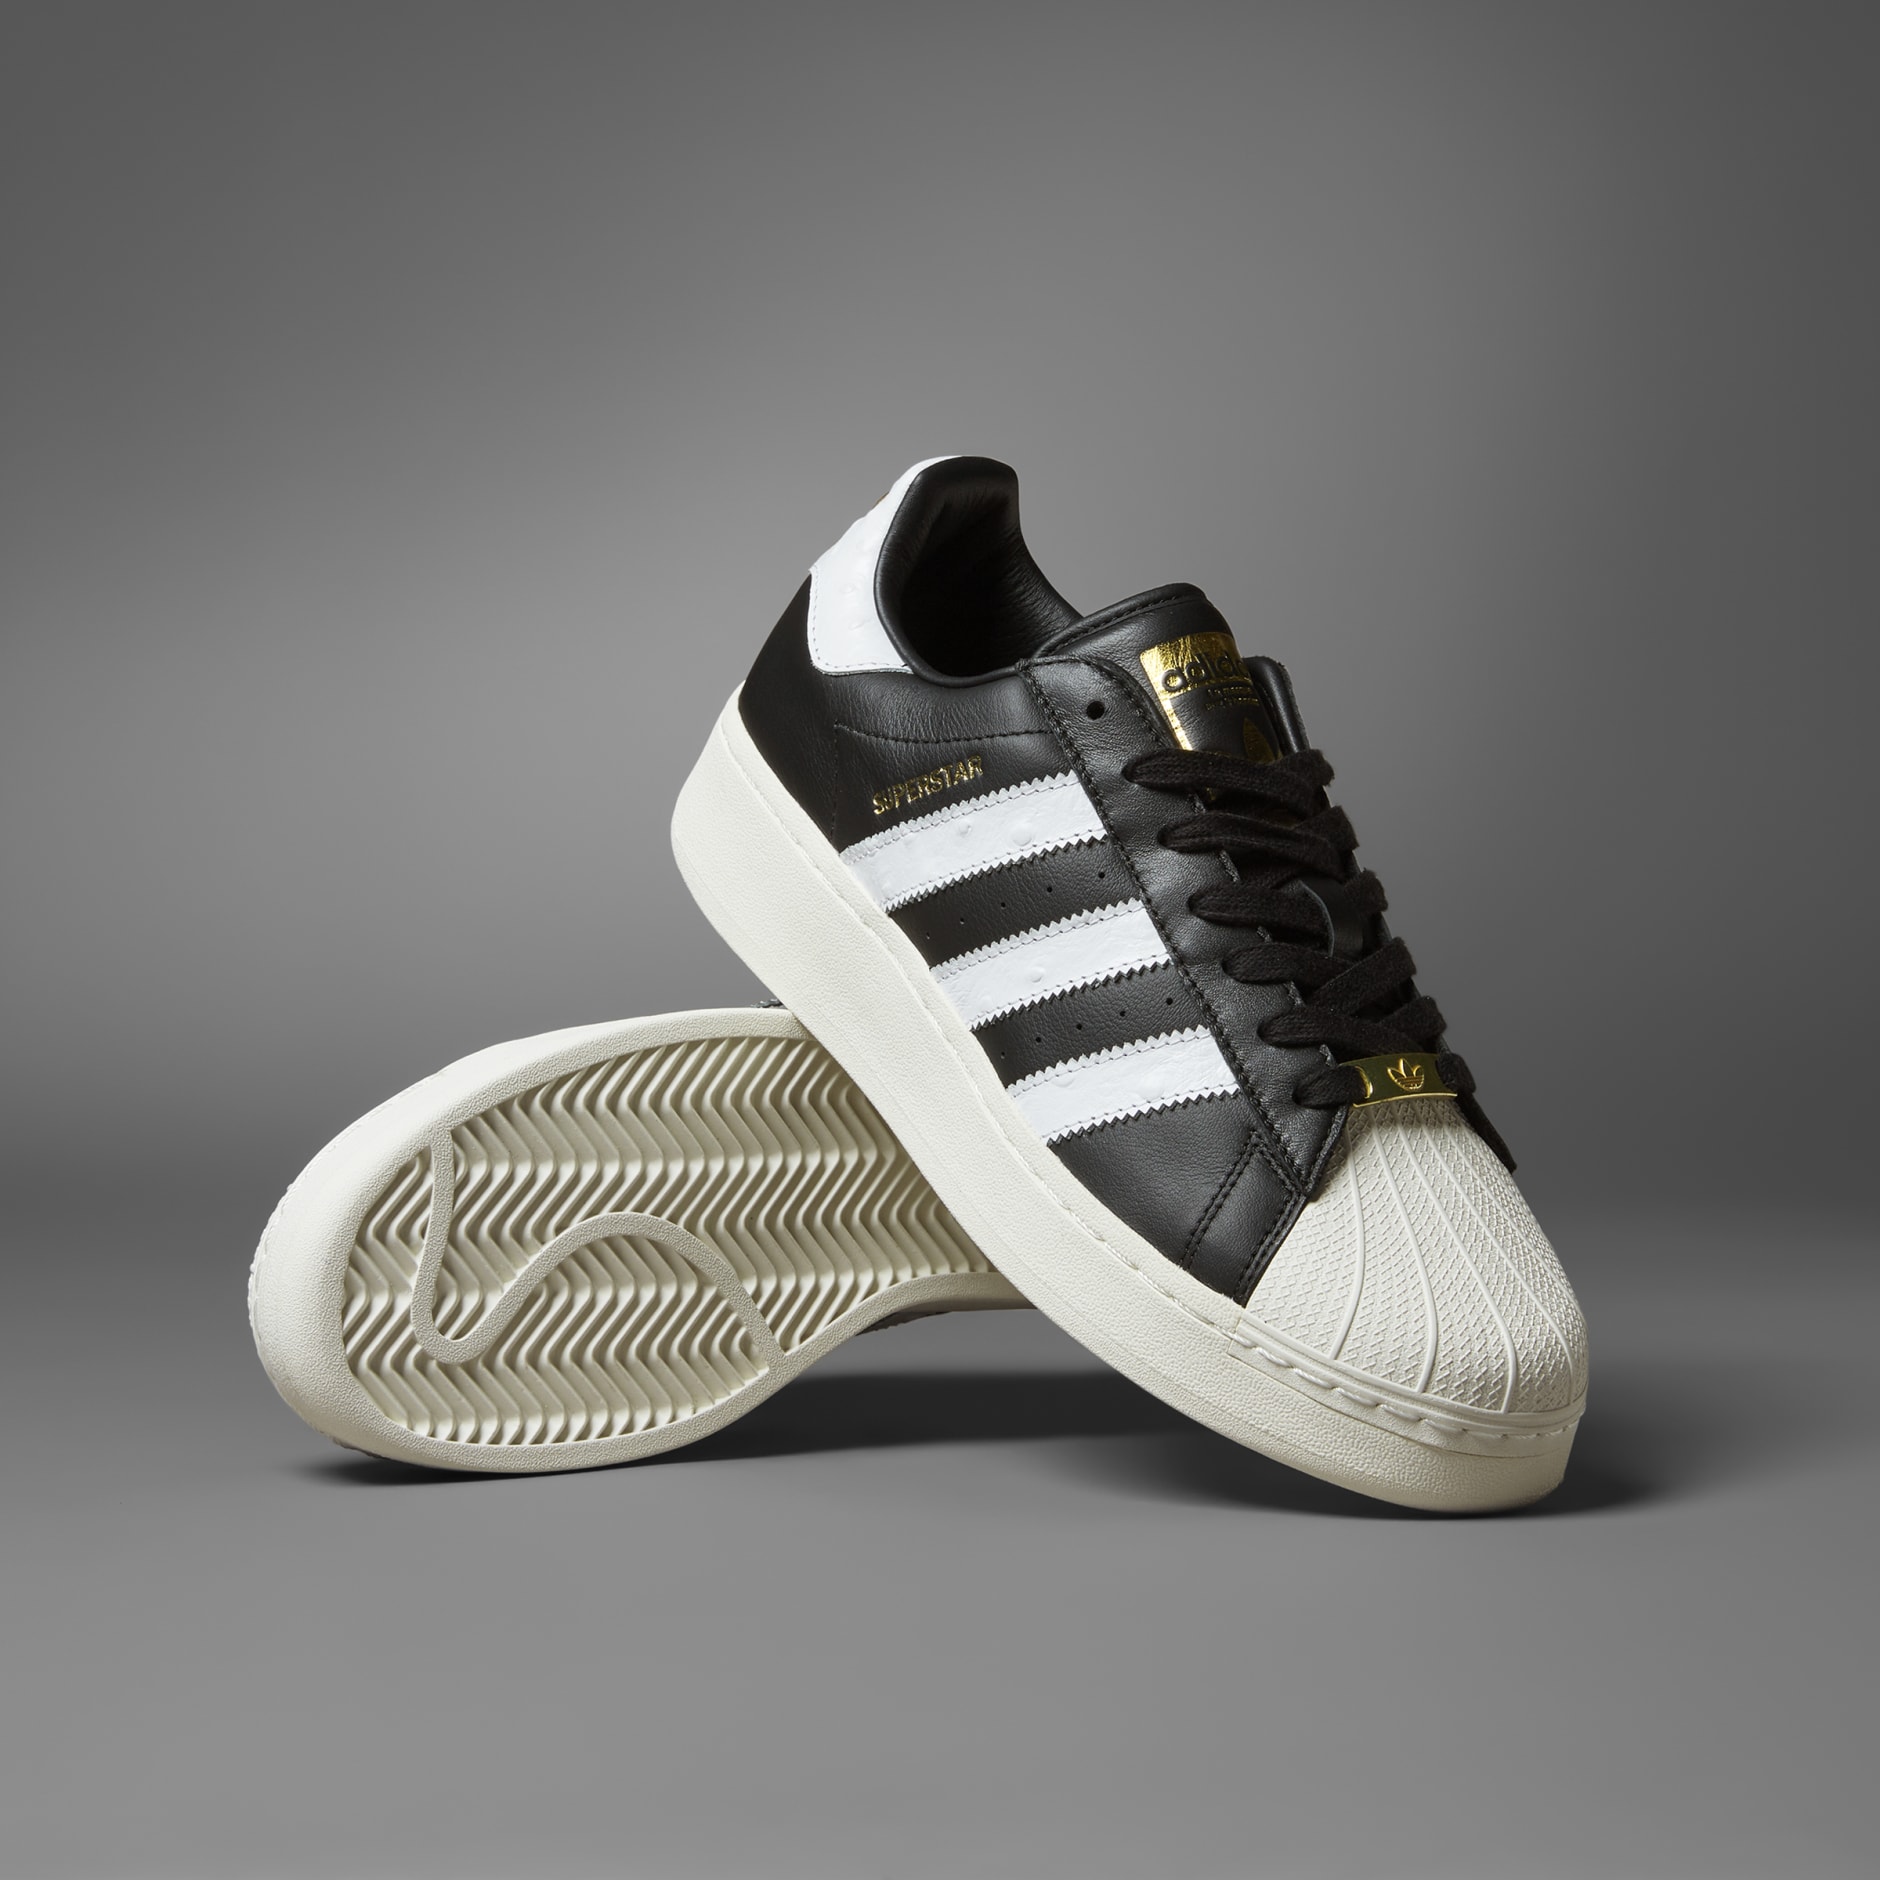 Men's shoes adidas Superstar Xlg Ftw White/ Ftw White/ Gold